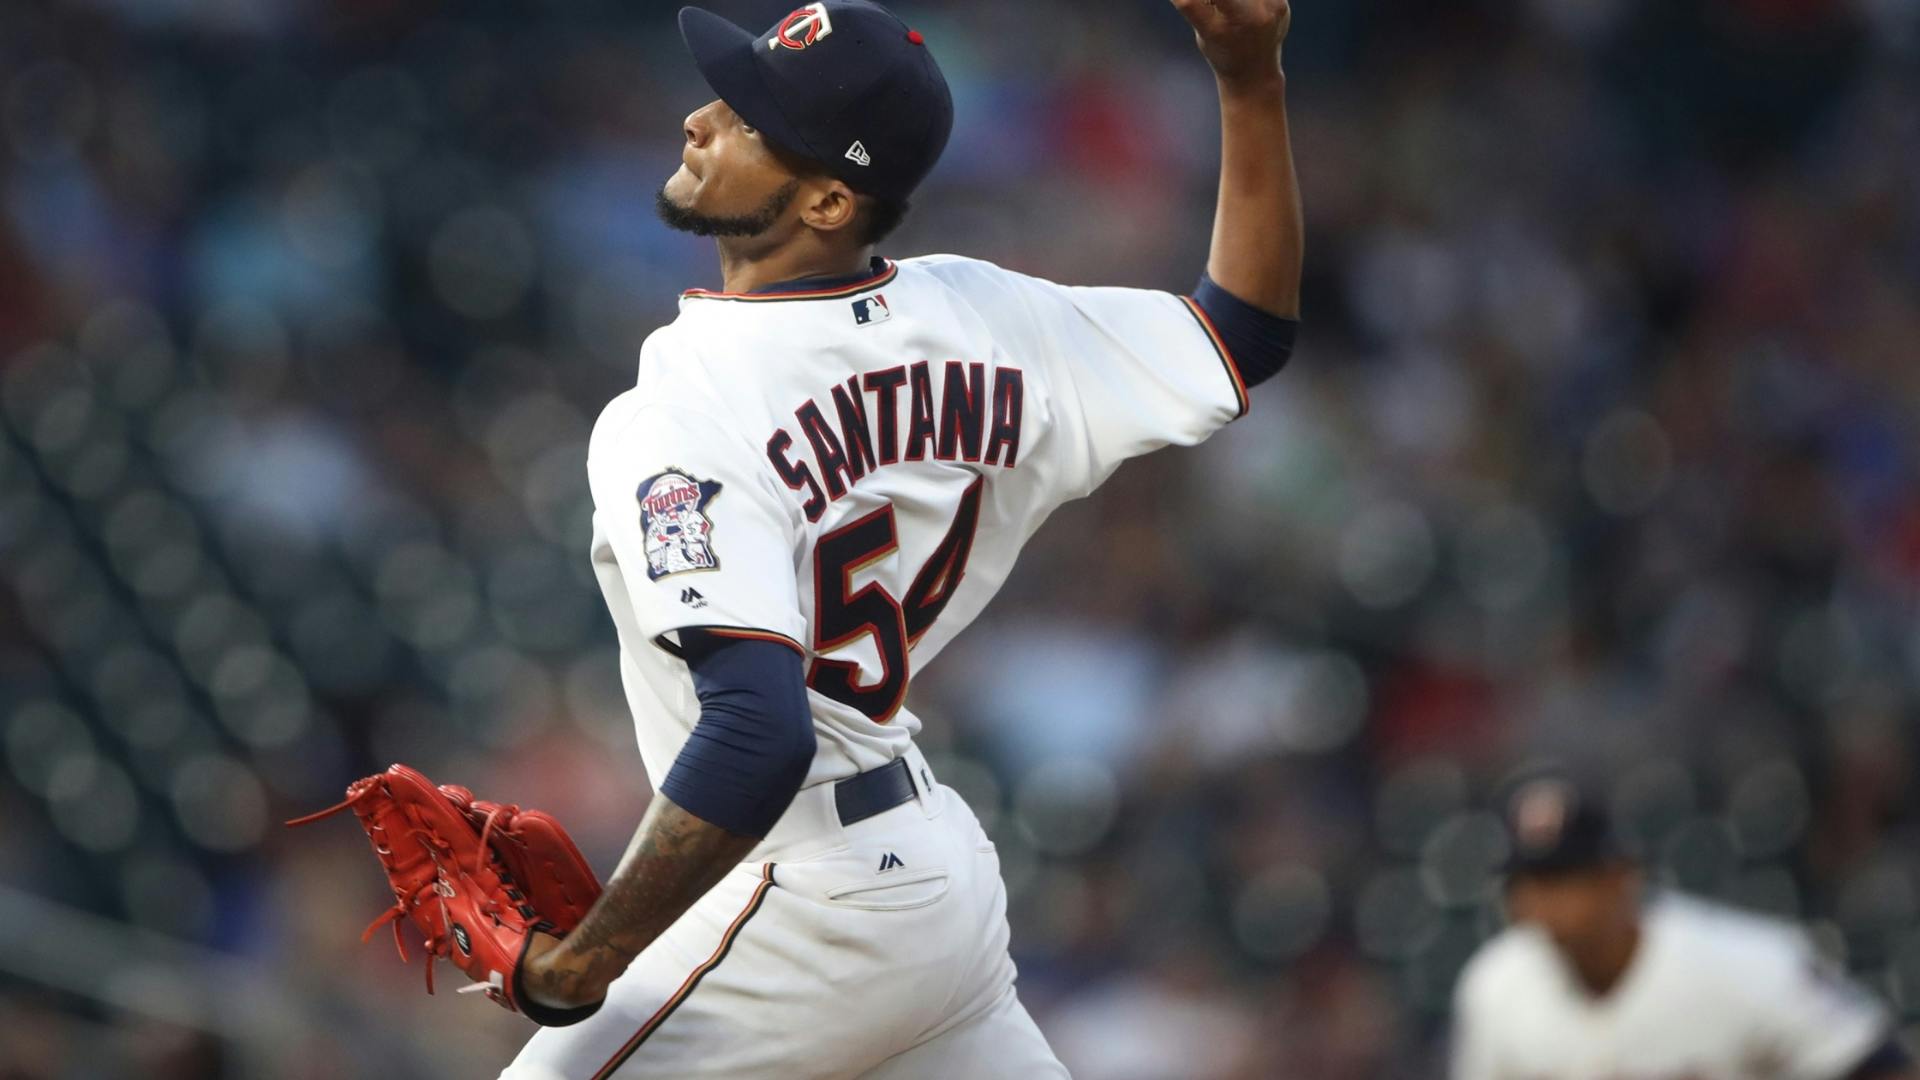 Ervin Santana has won at least 14 games in a season for the fifth time in his career